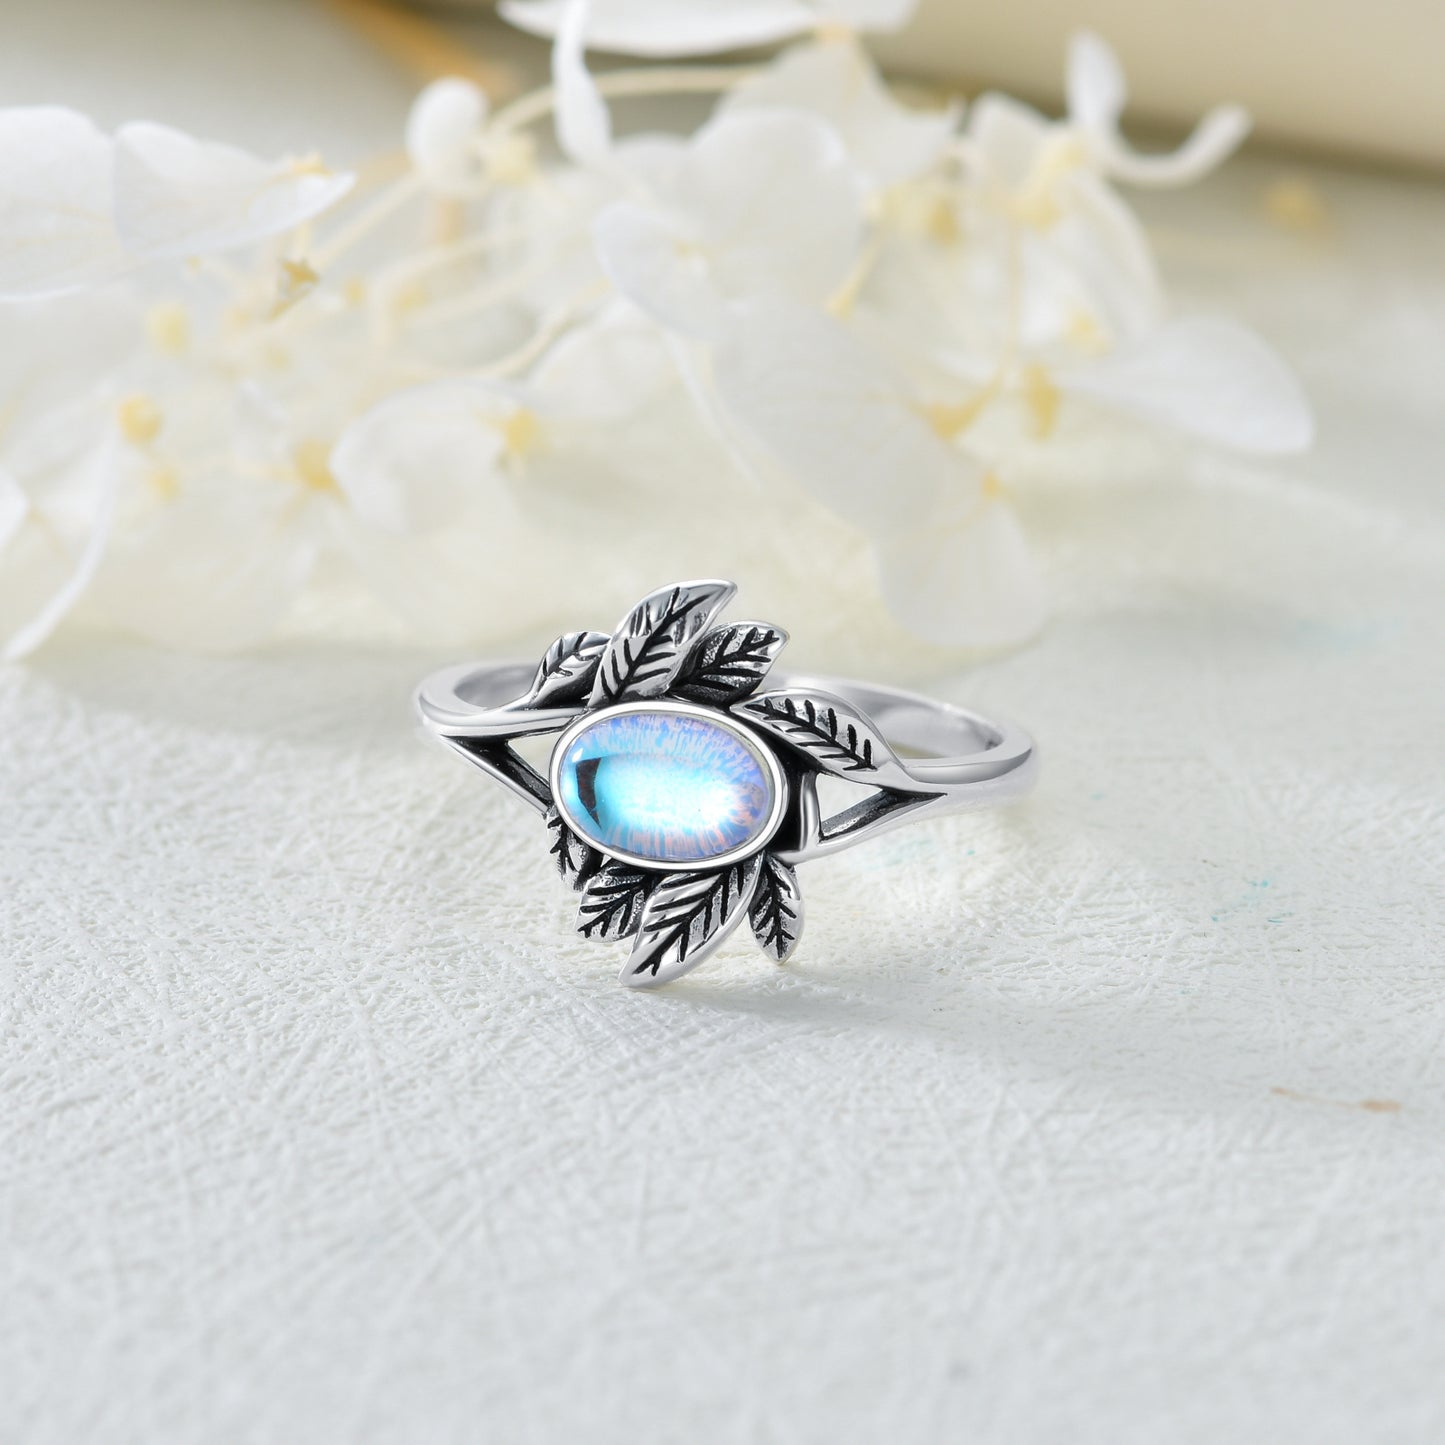 Moonstone Ring Sterling Silver Jewelry Gifts for Women